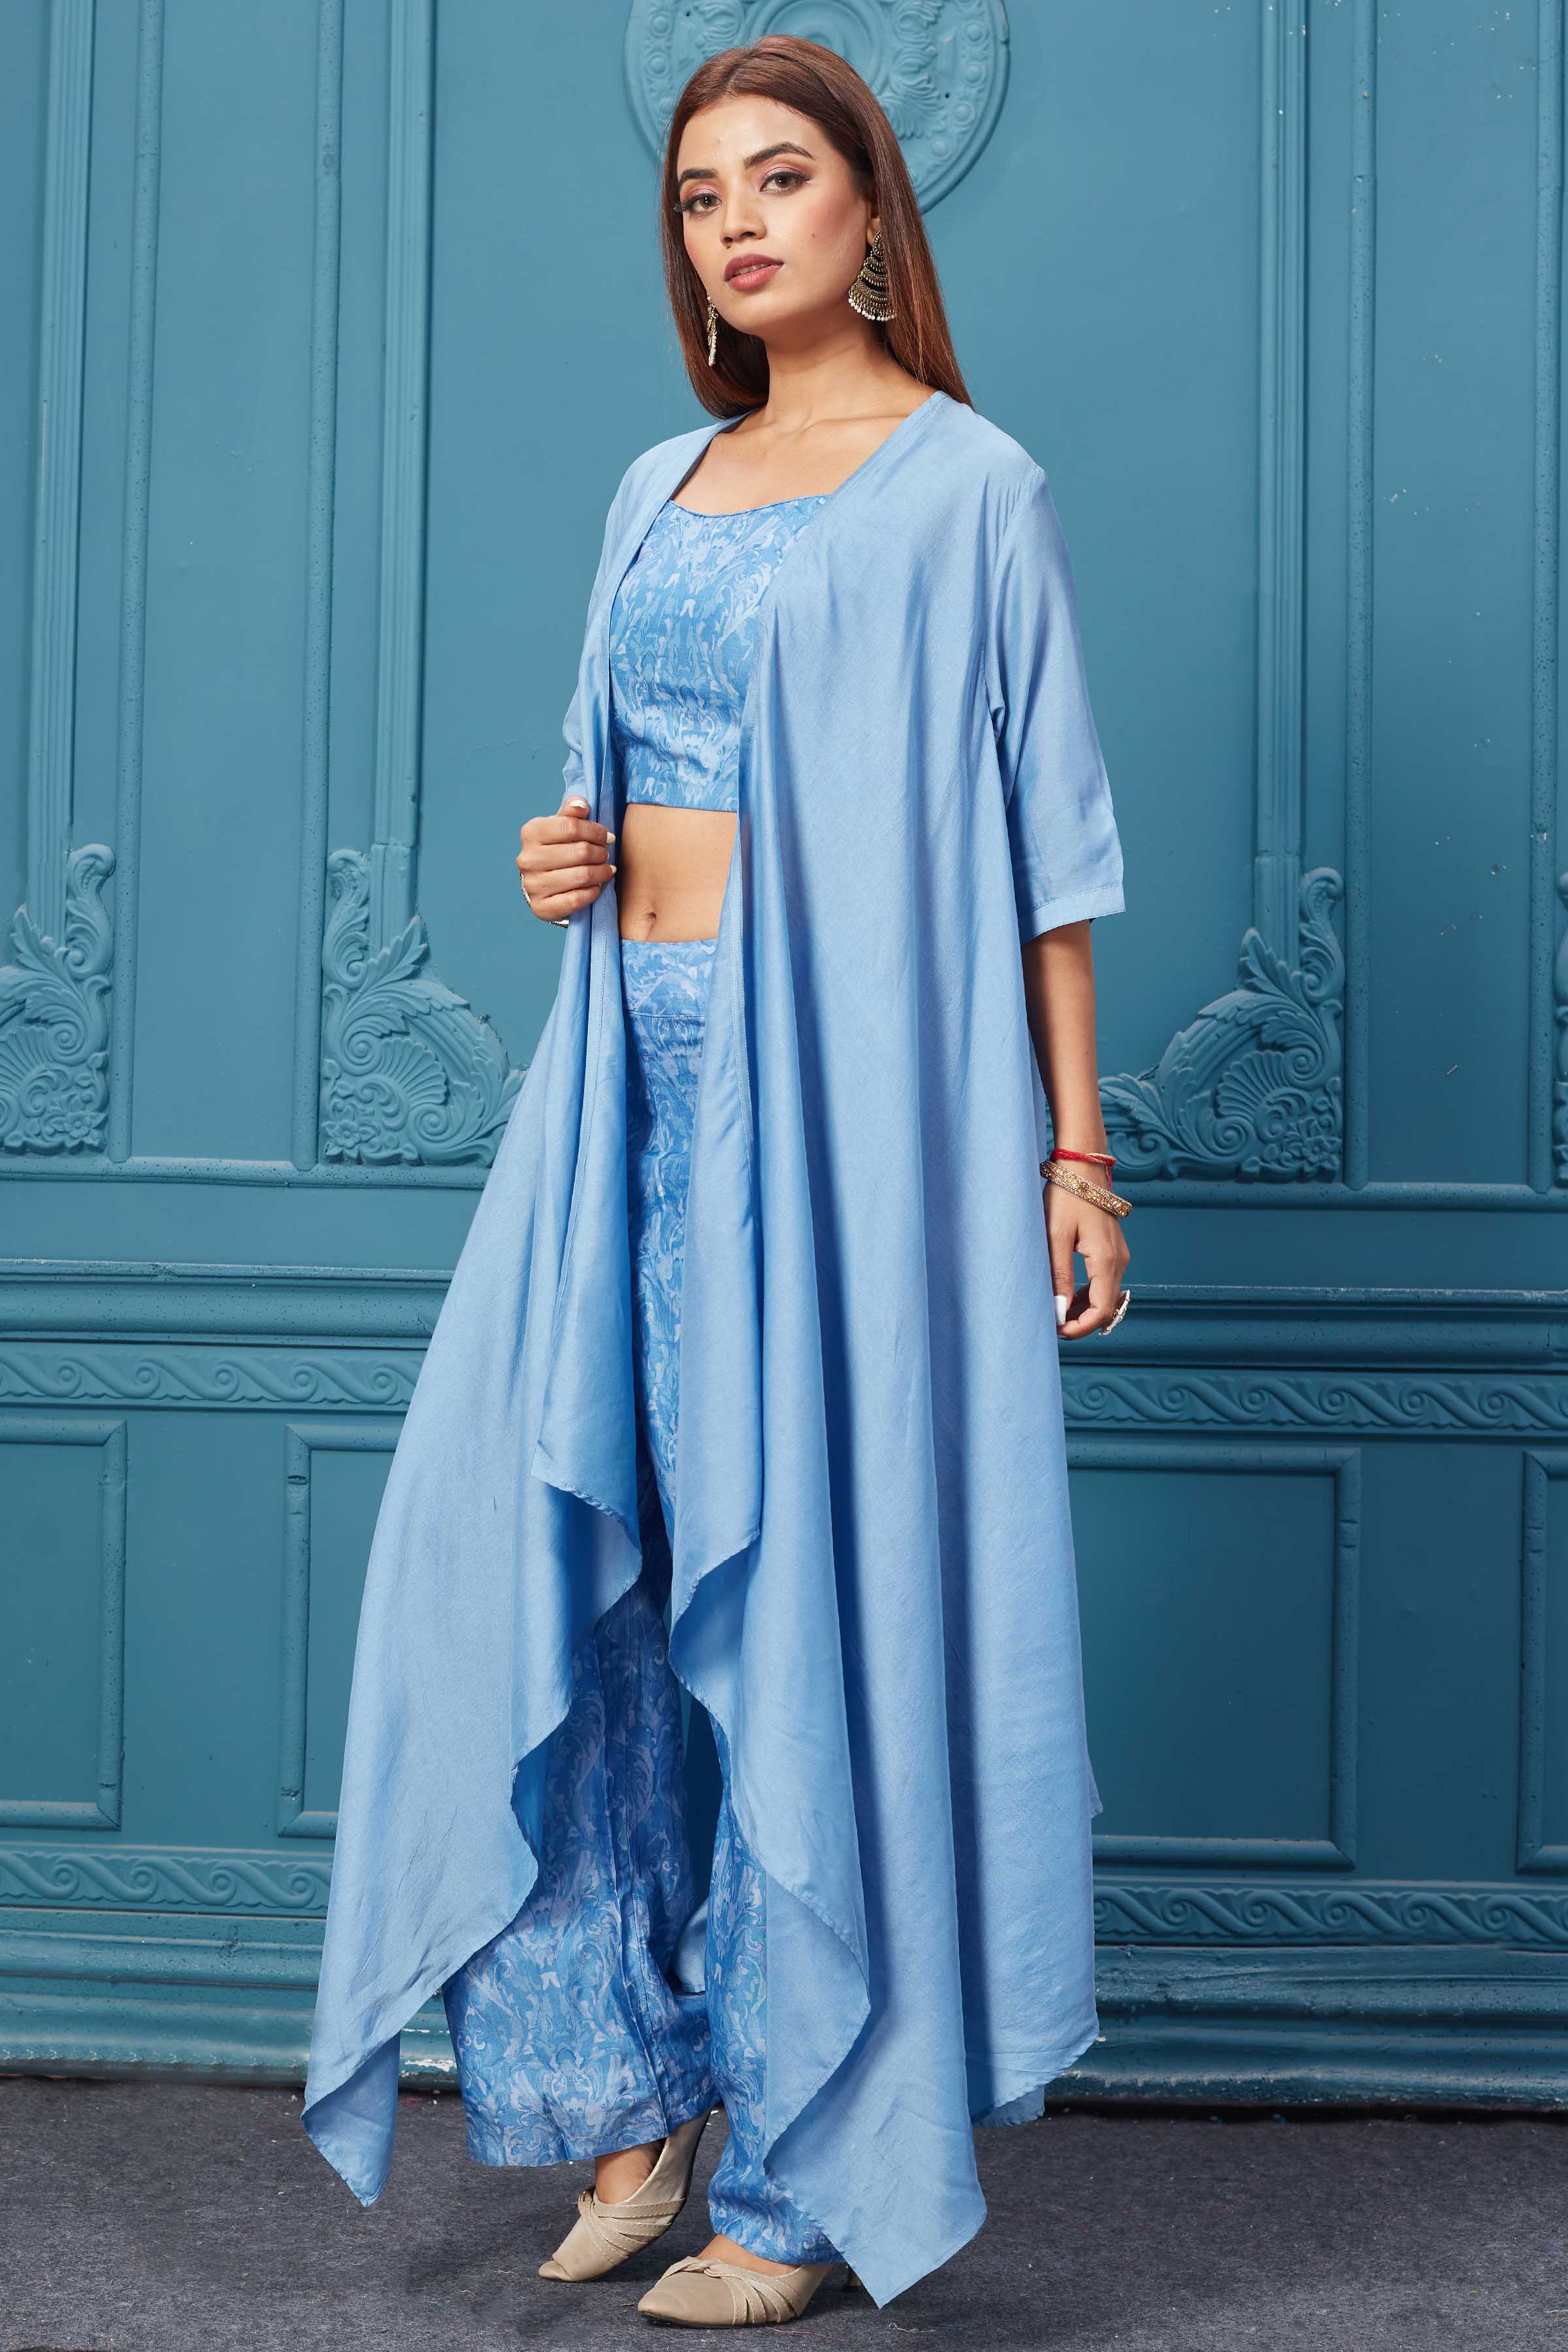 Buy this Gorgeous sky blue suit set with embroidery. Featuring beautiful pants, a blouse, and a stylish jacket. Shop Indian dresses, gowns, designer lehengas, and sarees online at Pure Elegance or visit our store in the USA.